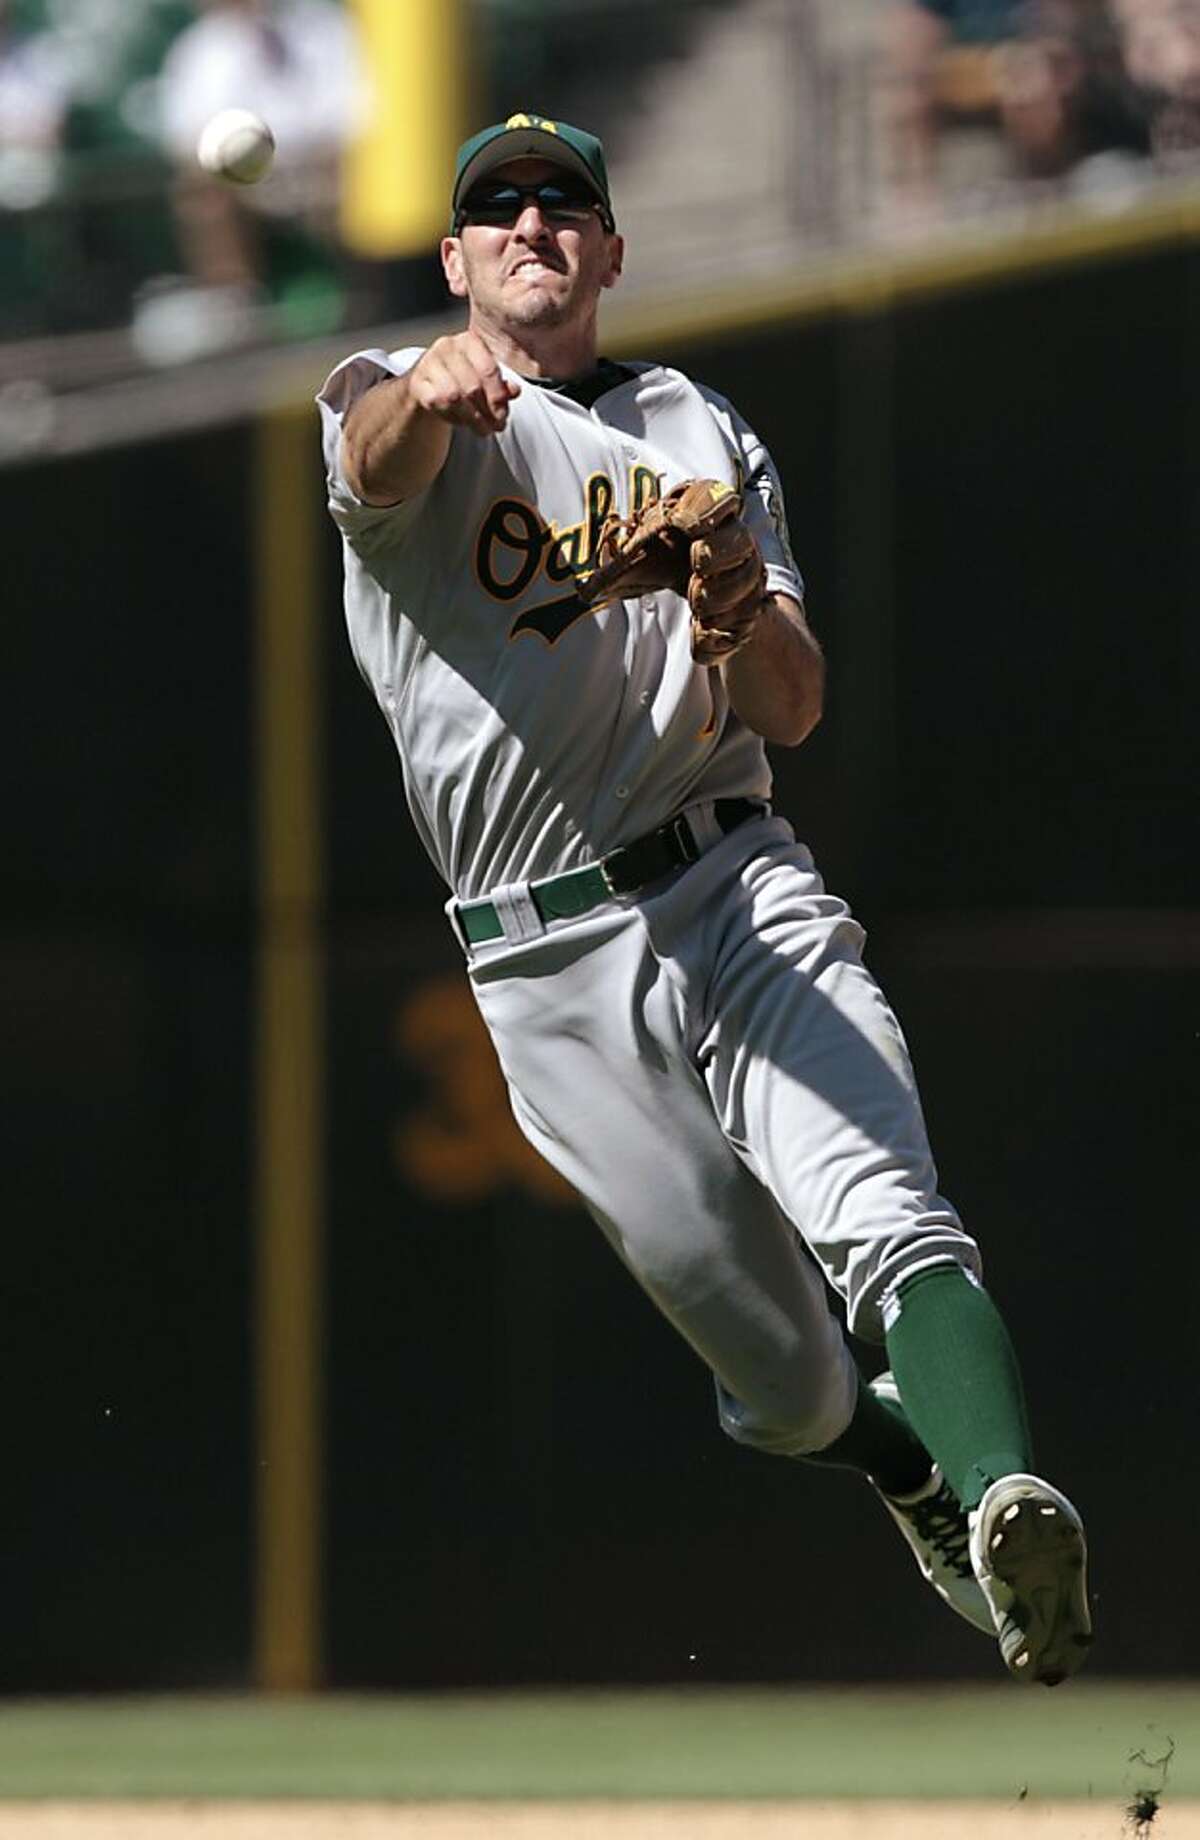 Oakland Athletics shortstop Adam Rosales throws to first on a grounder from Seattle Mariners' Greg Halman in the eighth inning of a baseball game Wednesday, Aug. 3, 2011, in Seattle. (AP Photo/Elaine Thompson)